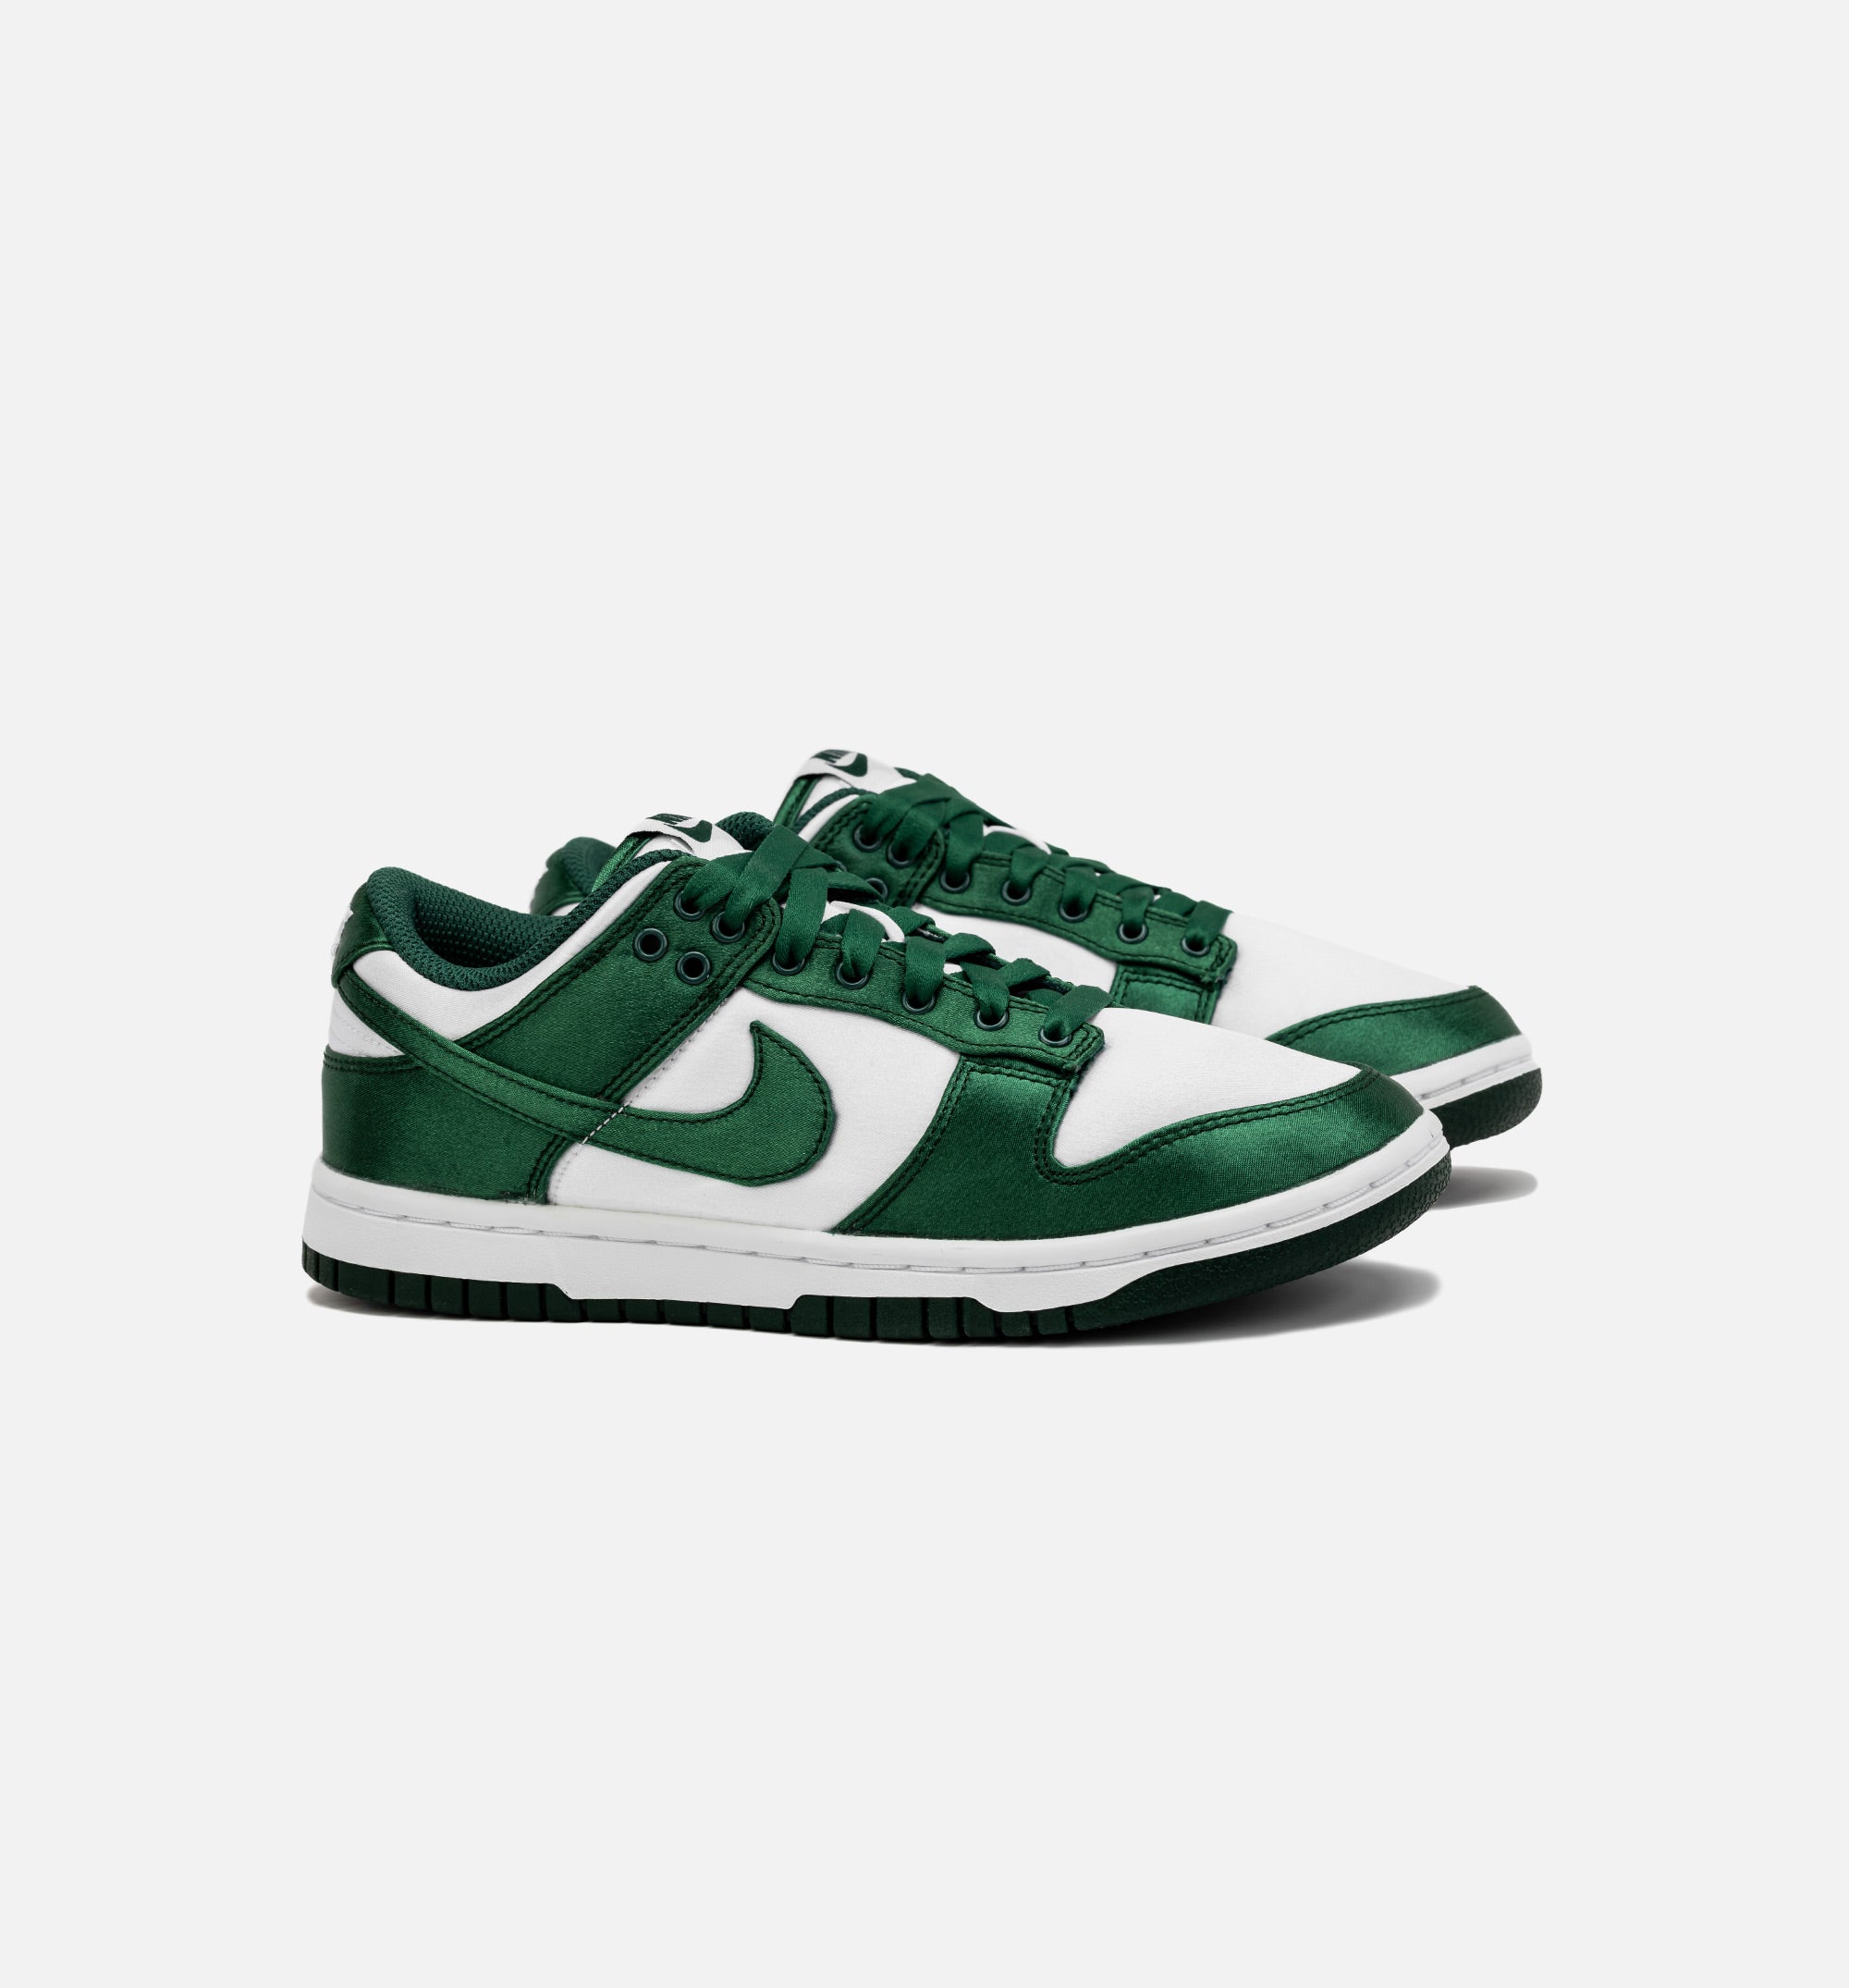 Nike Dunk Low Green Satin DX5931-100 Release